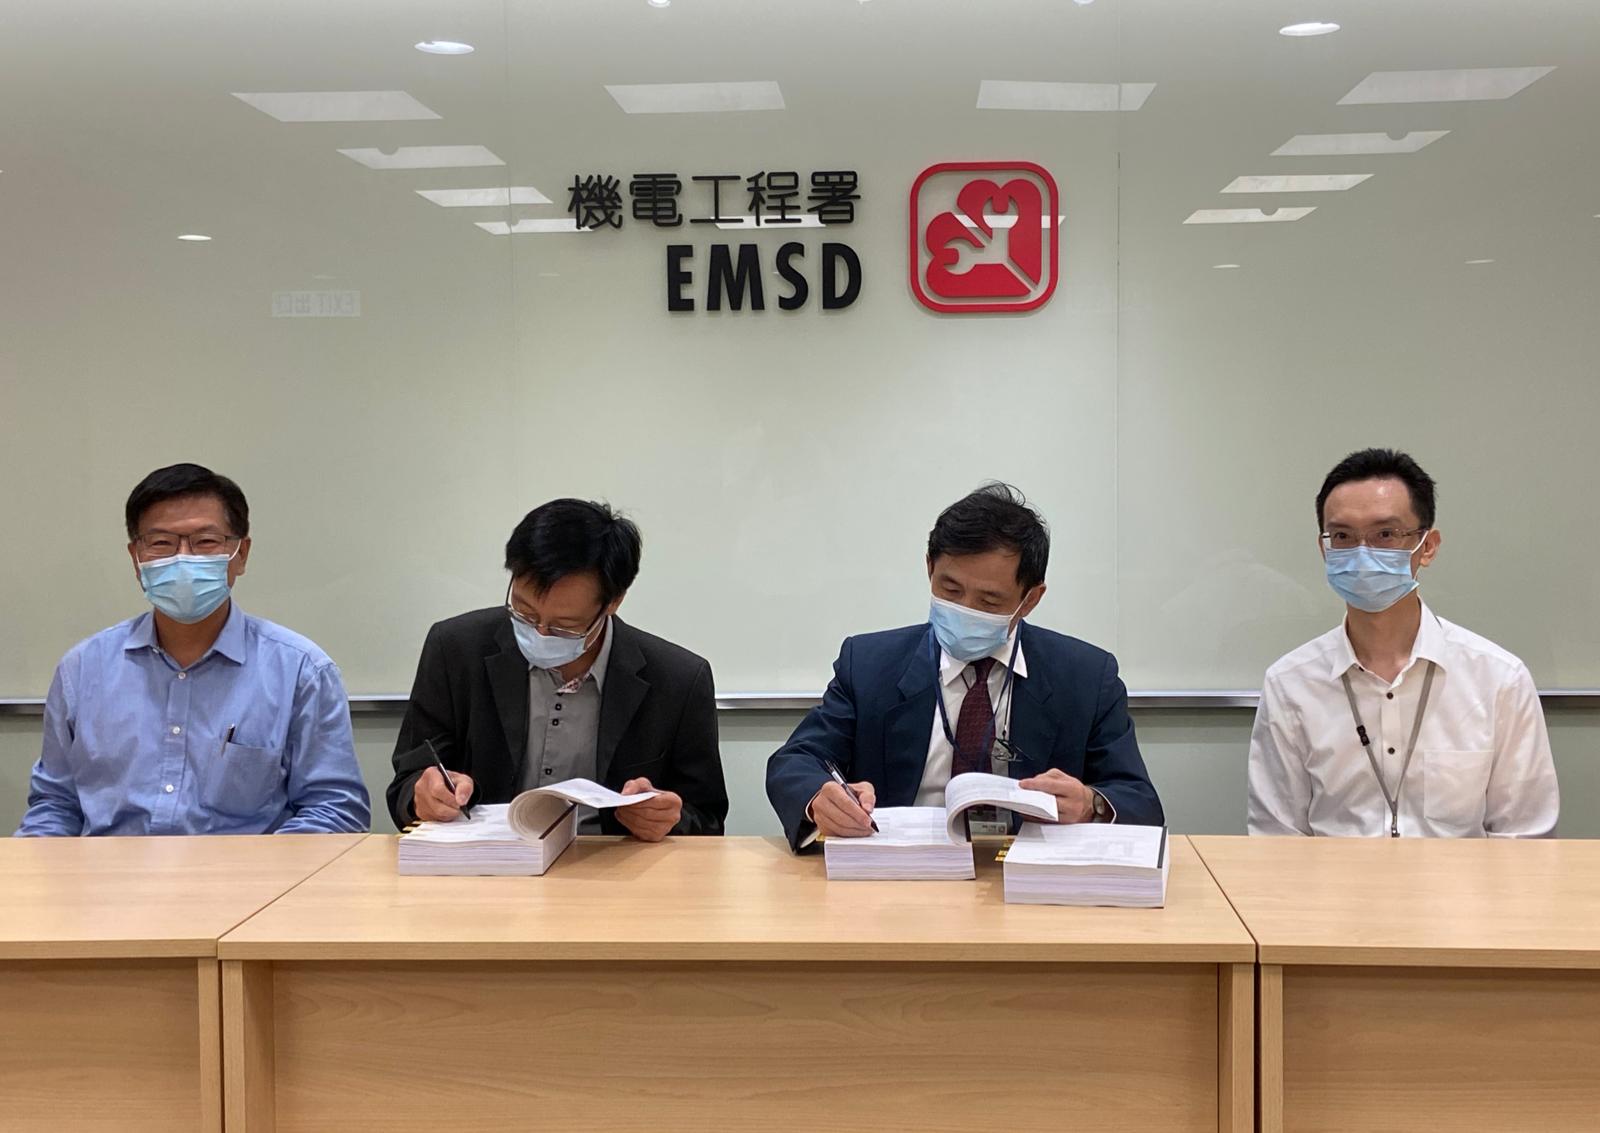 ClusterTech Signing with EMSD